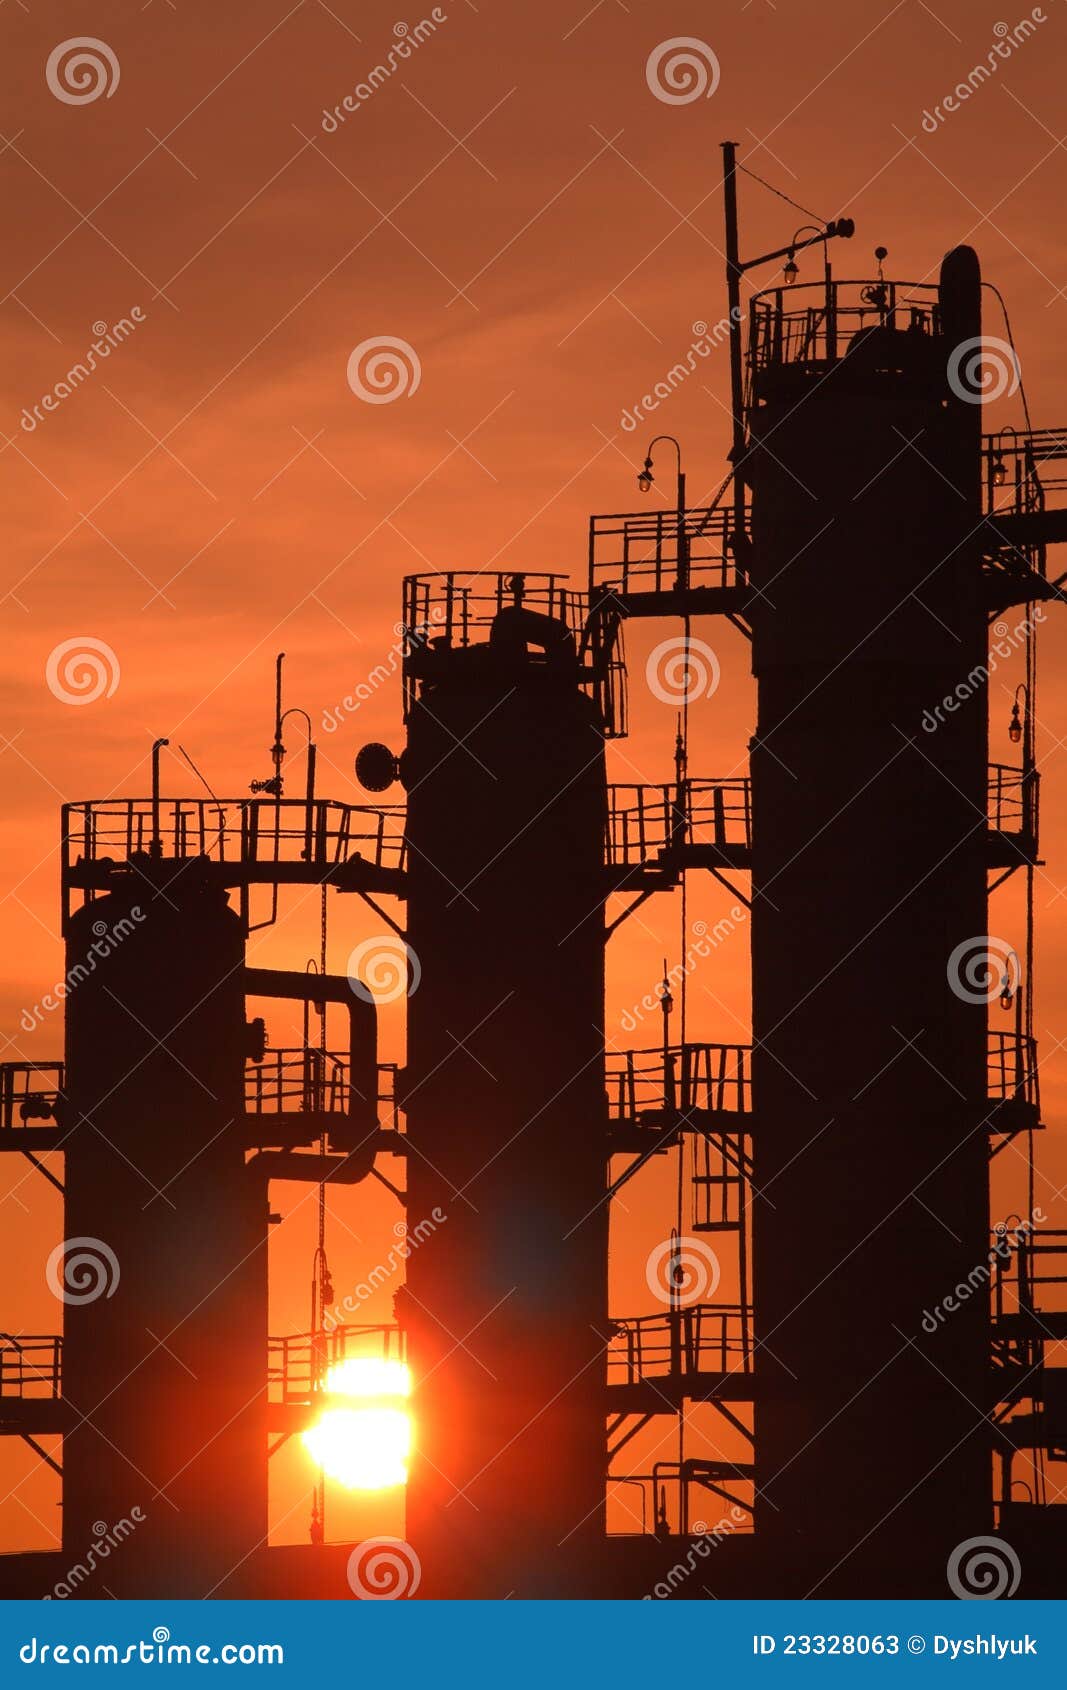 russian oil and gas industry. the refining factory